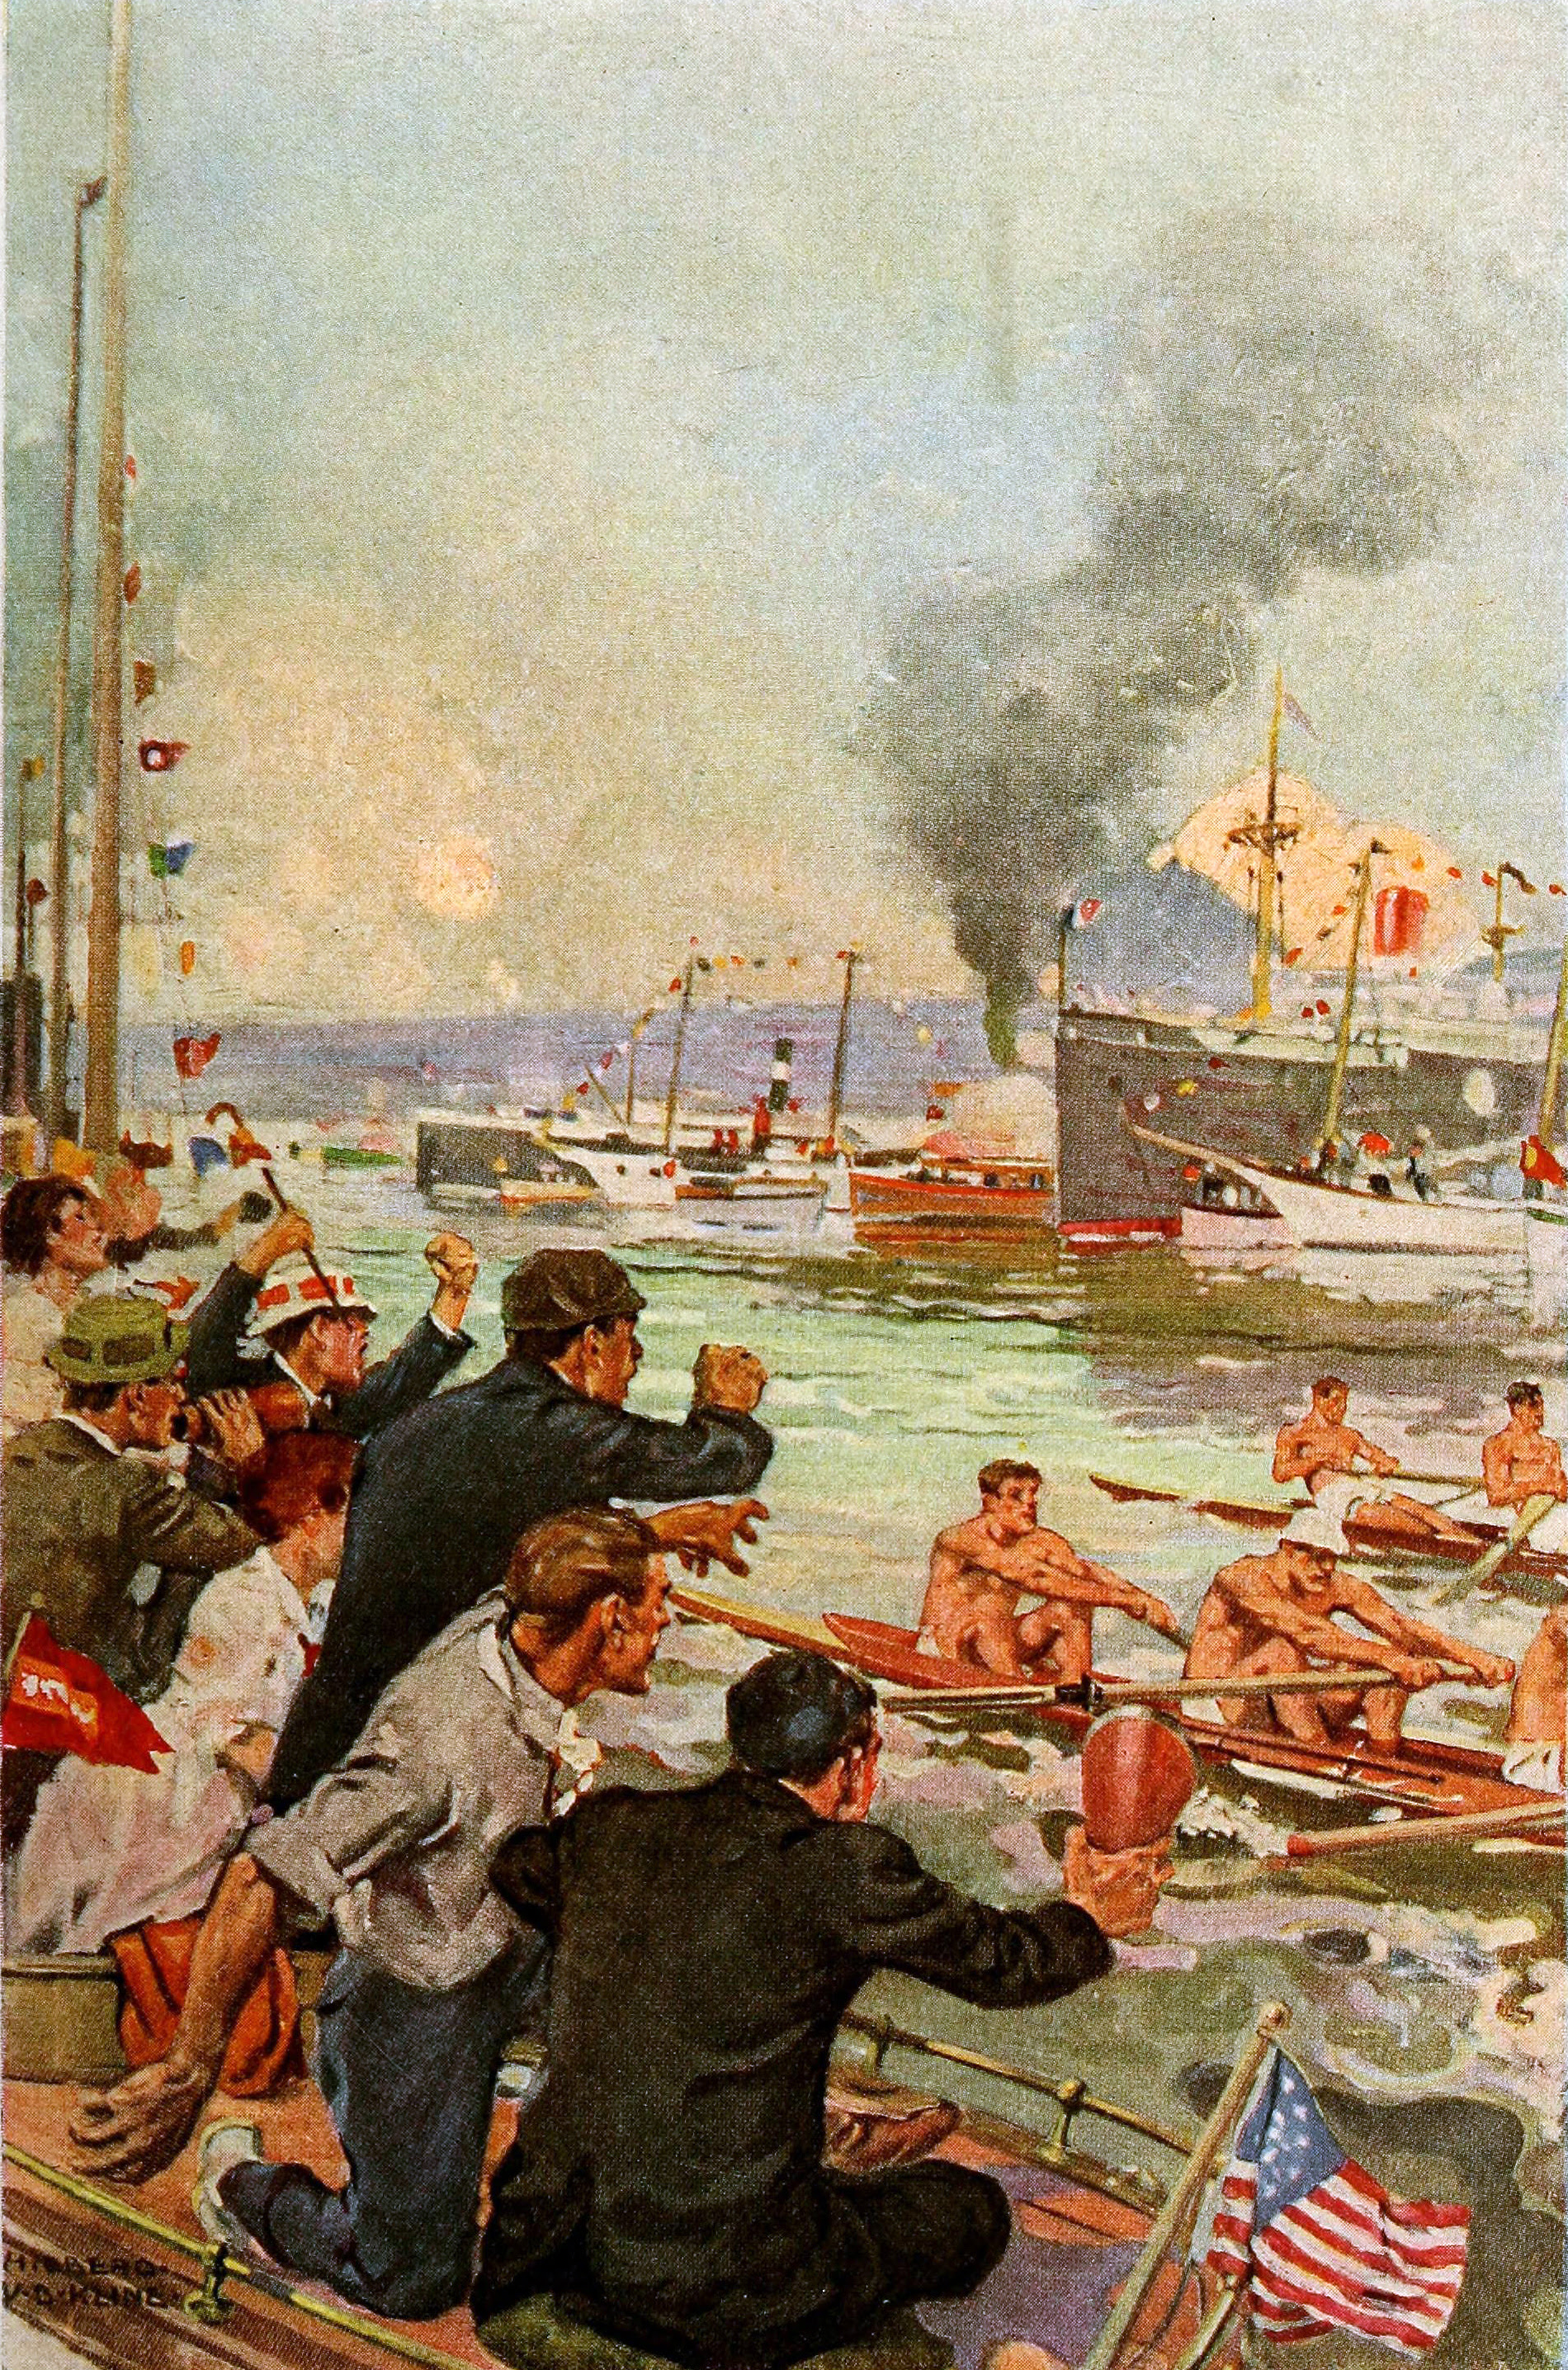 Painting of a rowing race with a crowd cheering and large boats in the background. Rowing art by Hibberd Van Buren Kline